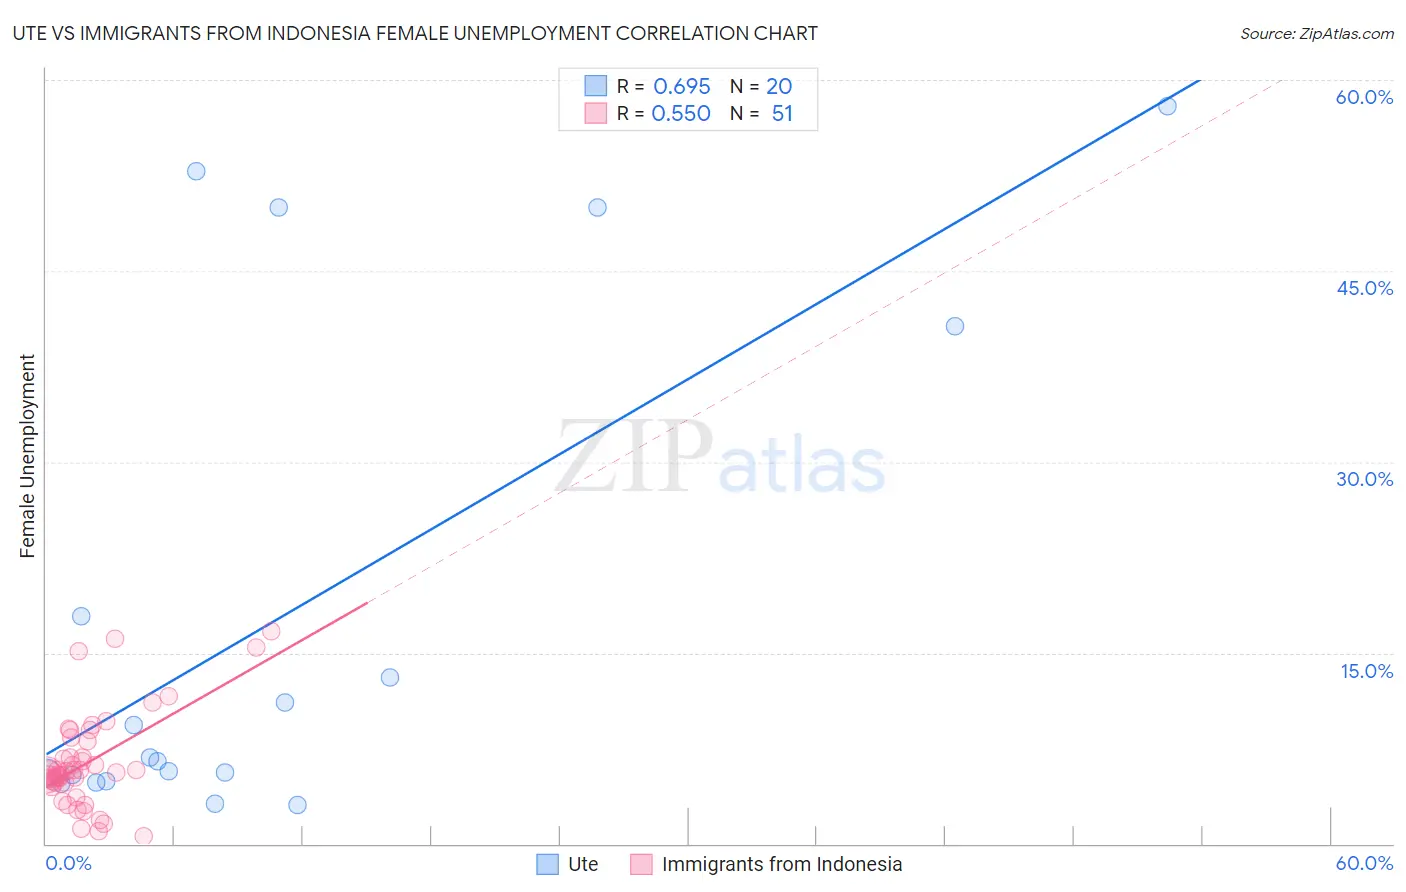 Ute vs Immigrants from Indonesia Female Unemployment